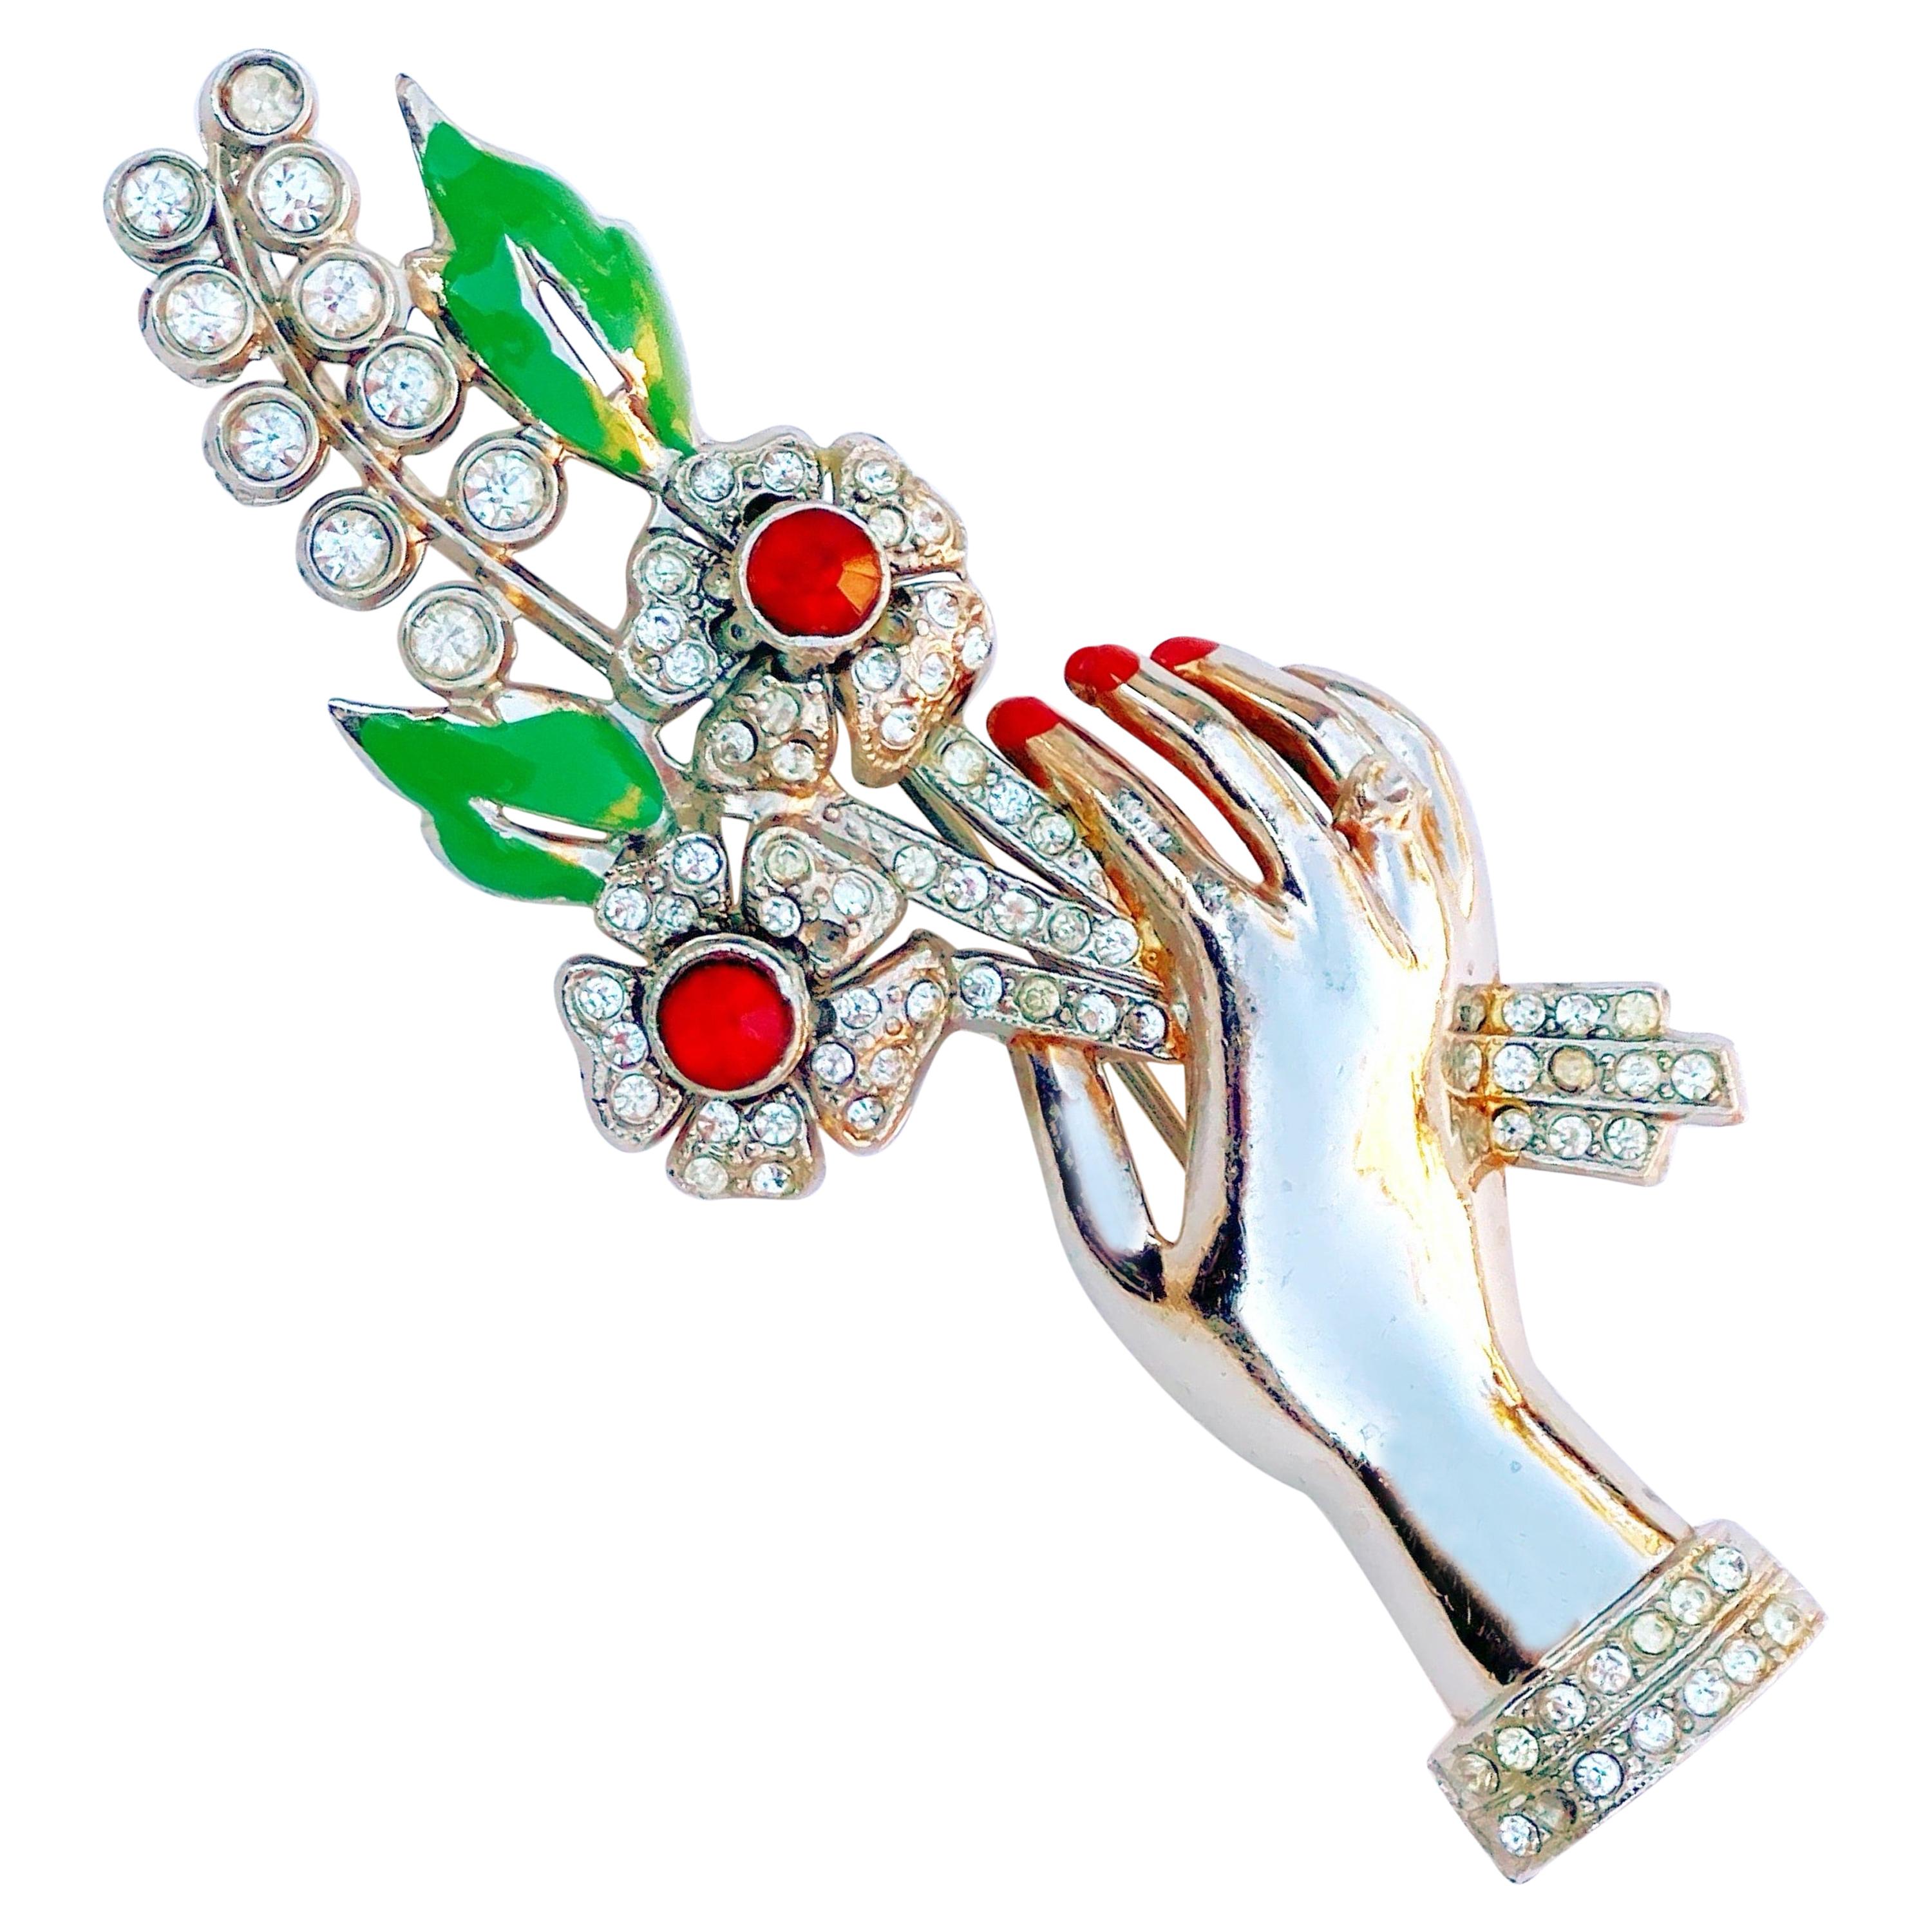 Vintage Silver Tone Hand Holding Flowers Figural Brooch, 1940s